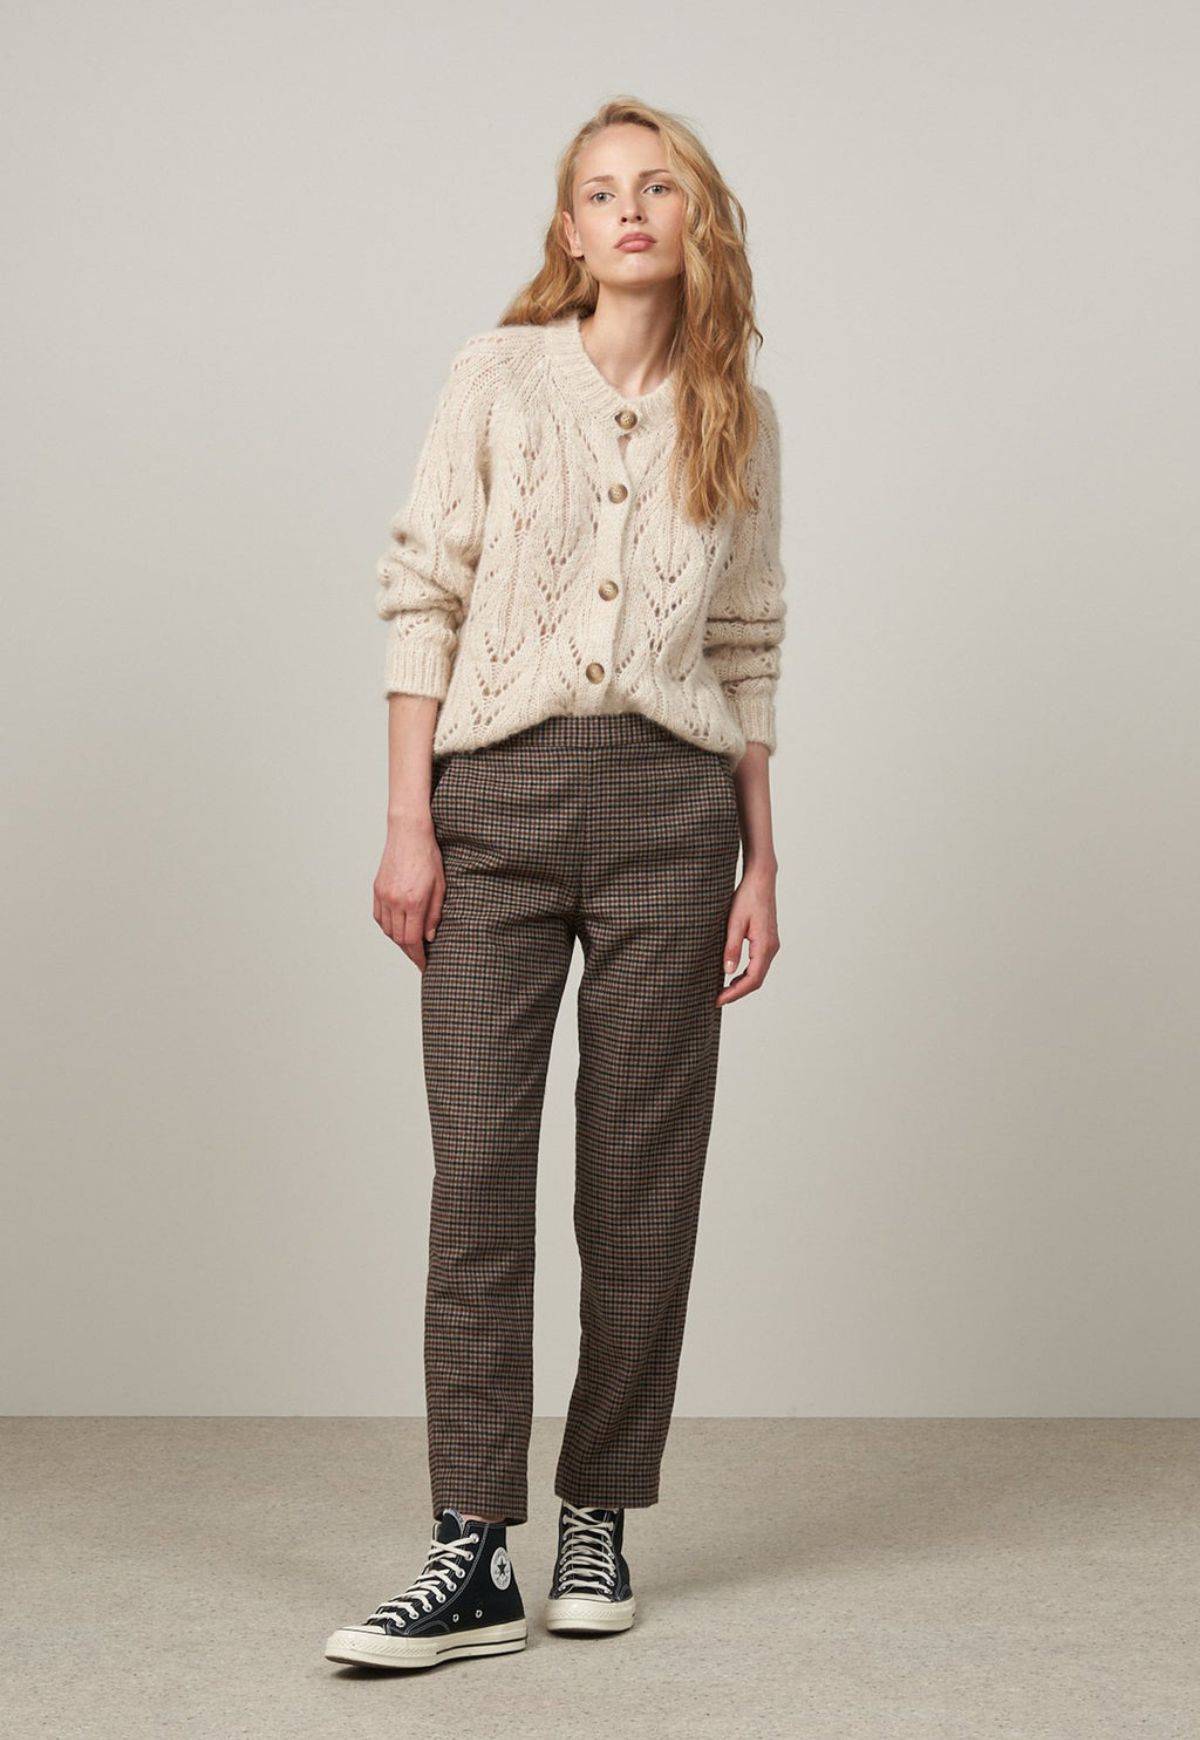 Image of a woman wearing Hartford Pixel Pant. Straight legged, full length trousers in small brown and black check.